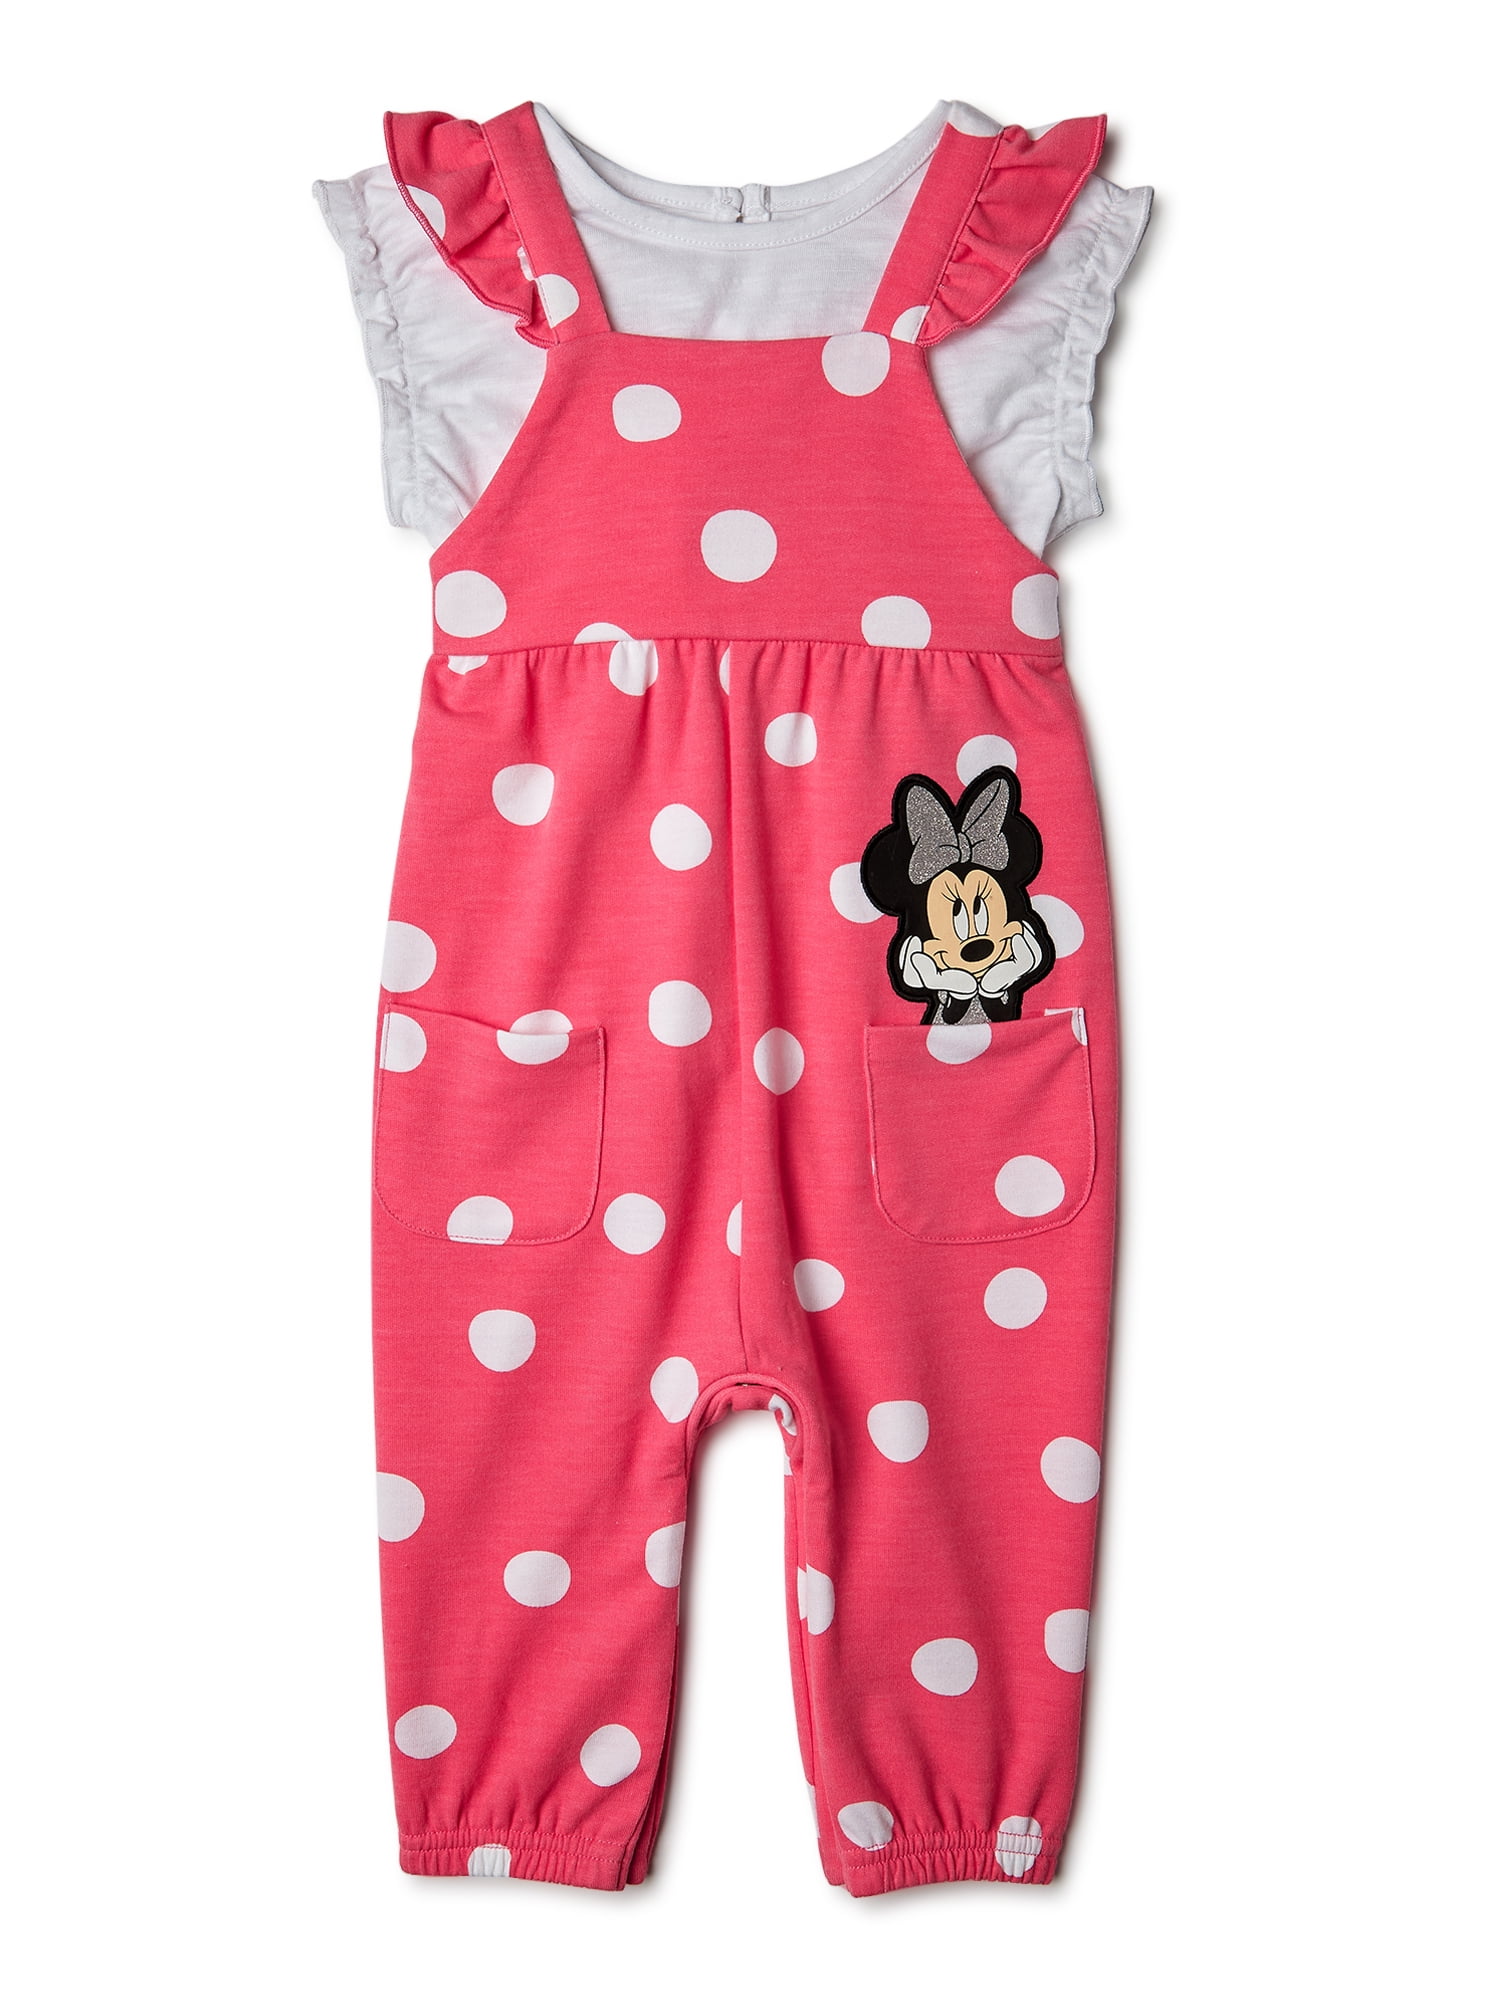 0-9 Months Disney Minnie Mouse Gift Set for Baby Romper Hat Bib brand new 